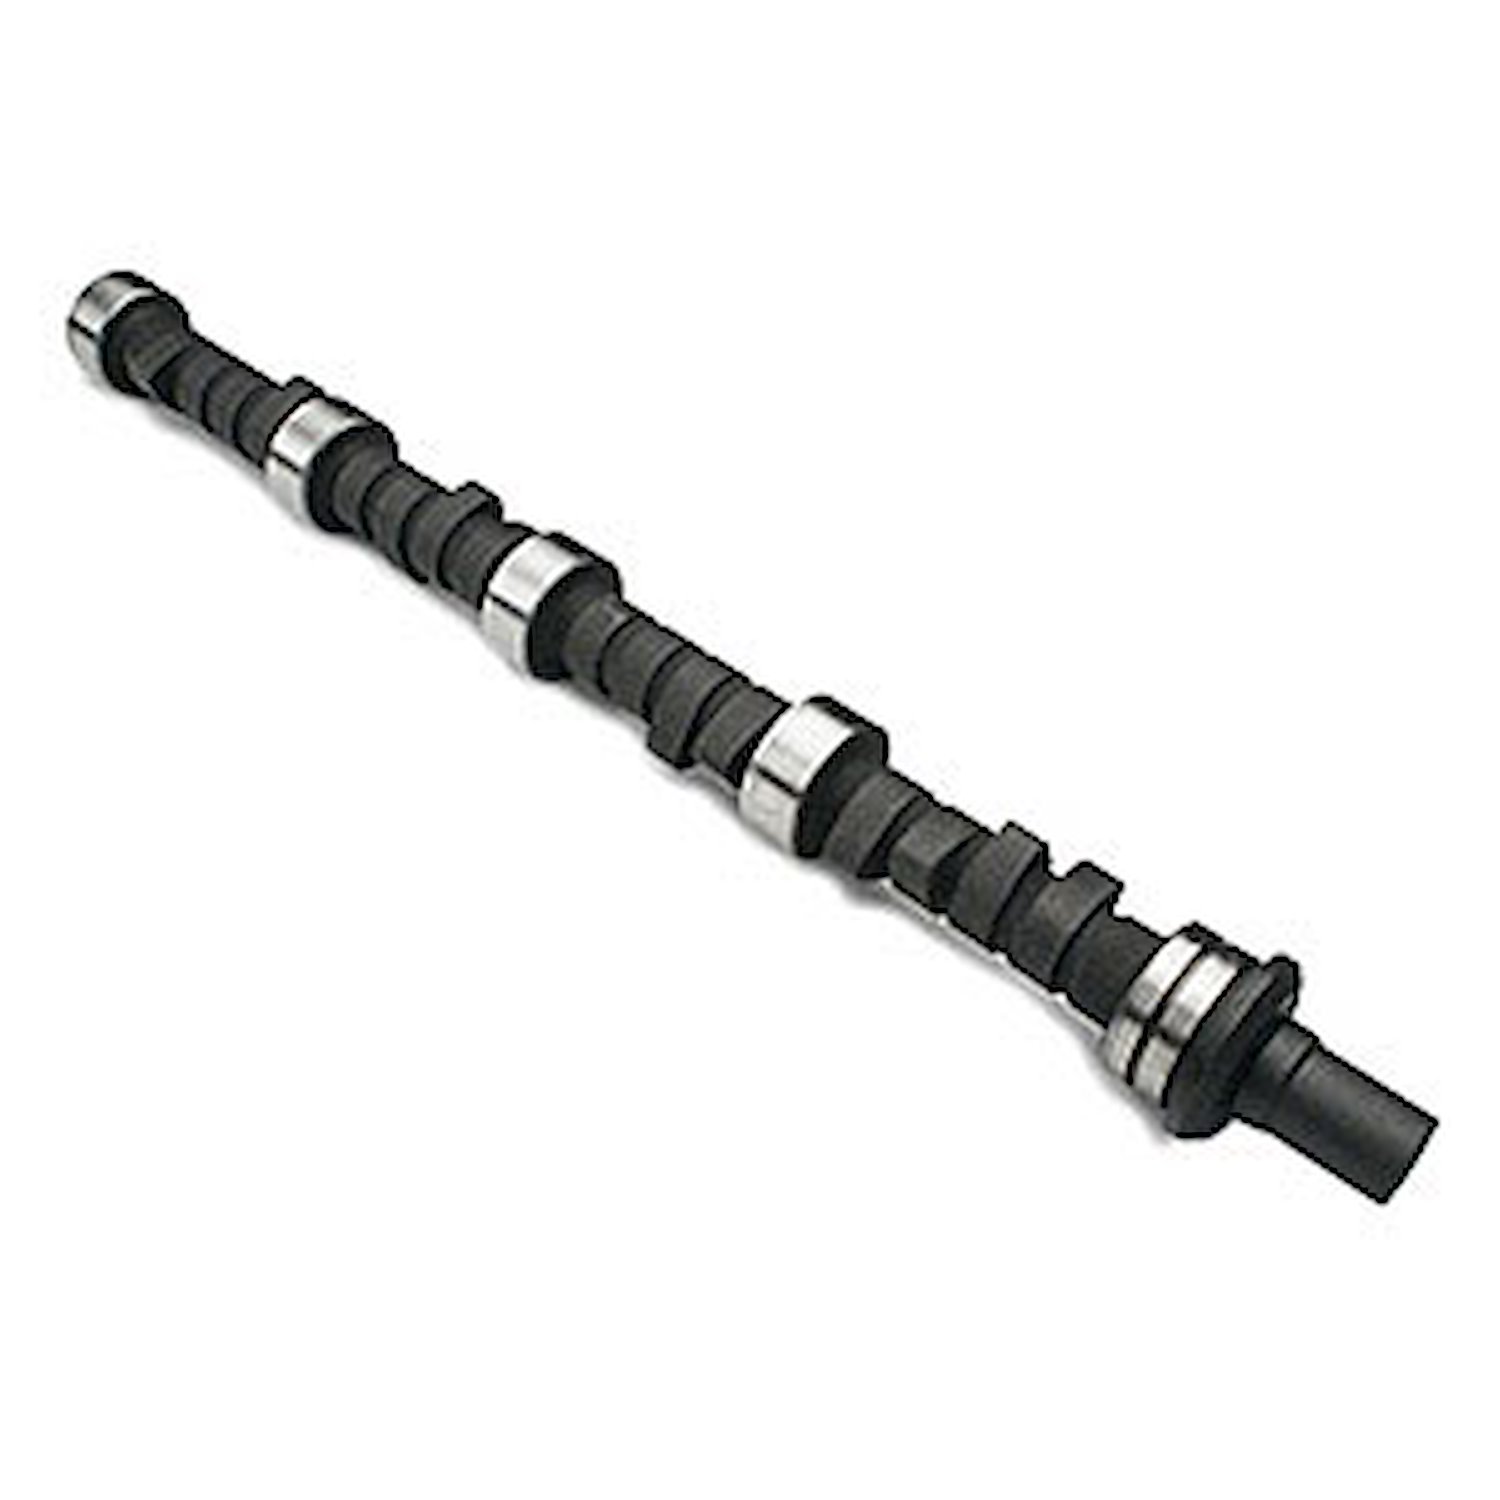 Compu-Pro Hydraulic Flat Tappet Camshaft for Buick 215-340